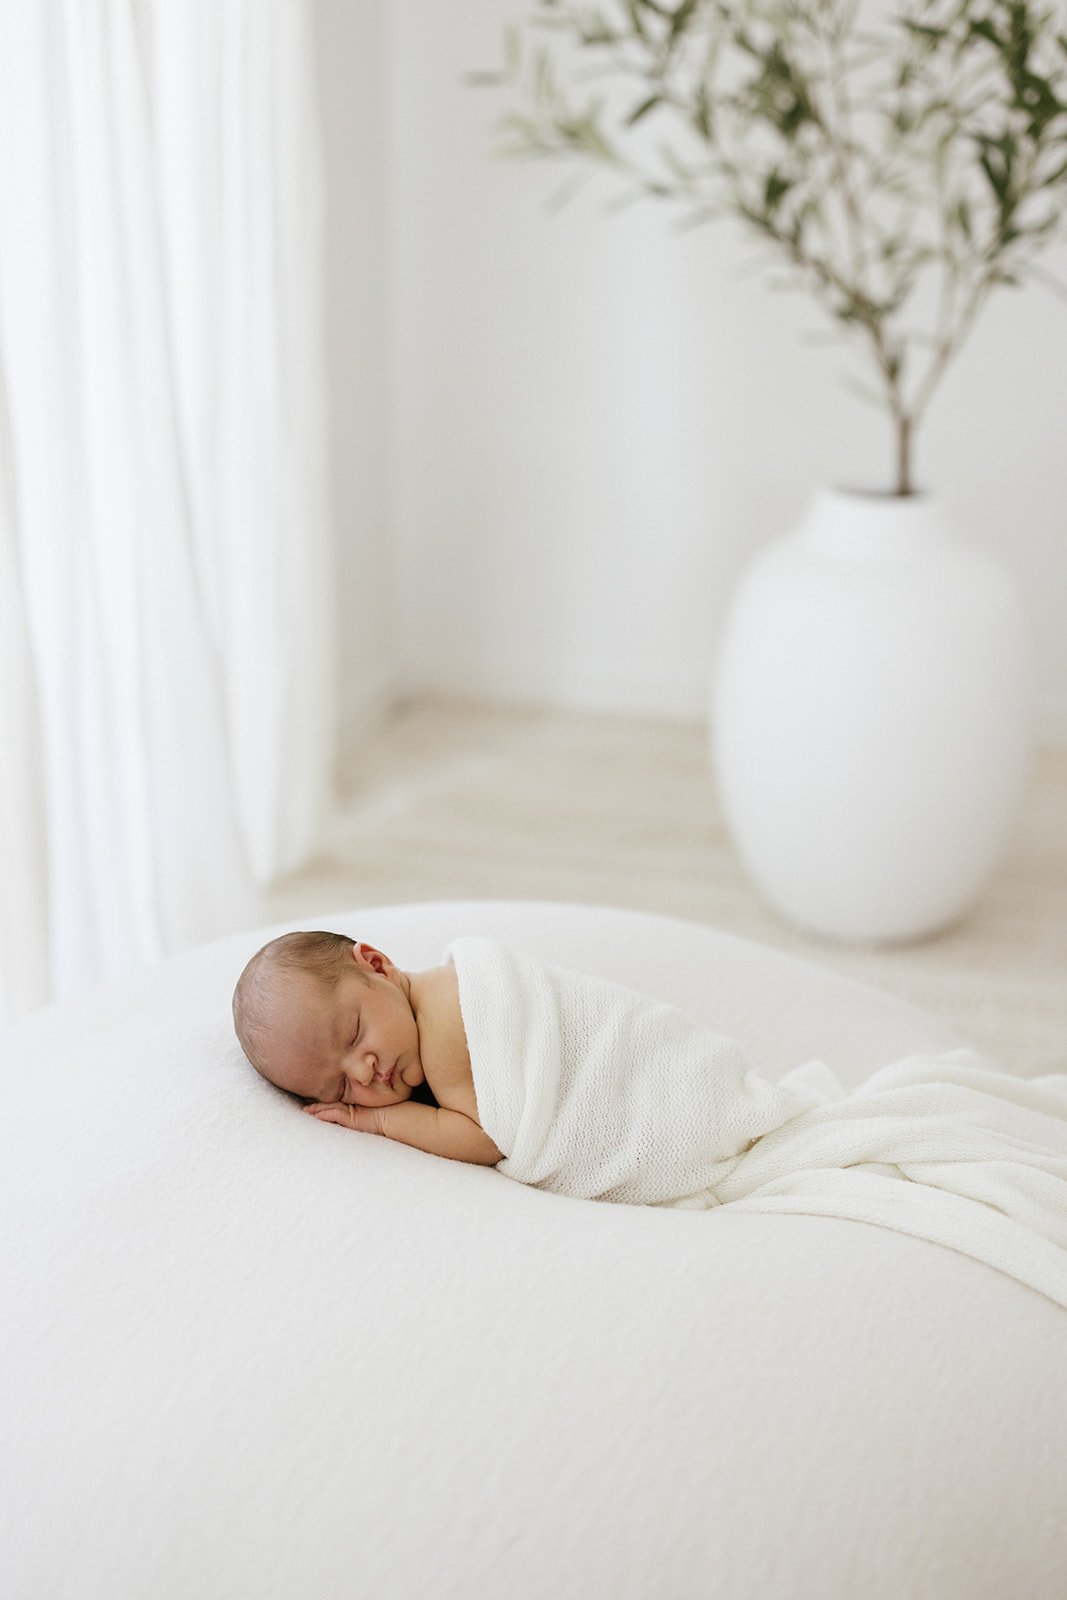  newborn baby photographed sitting on a white beanbag in front of an olive tree  